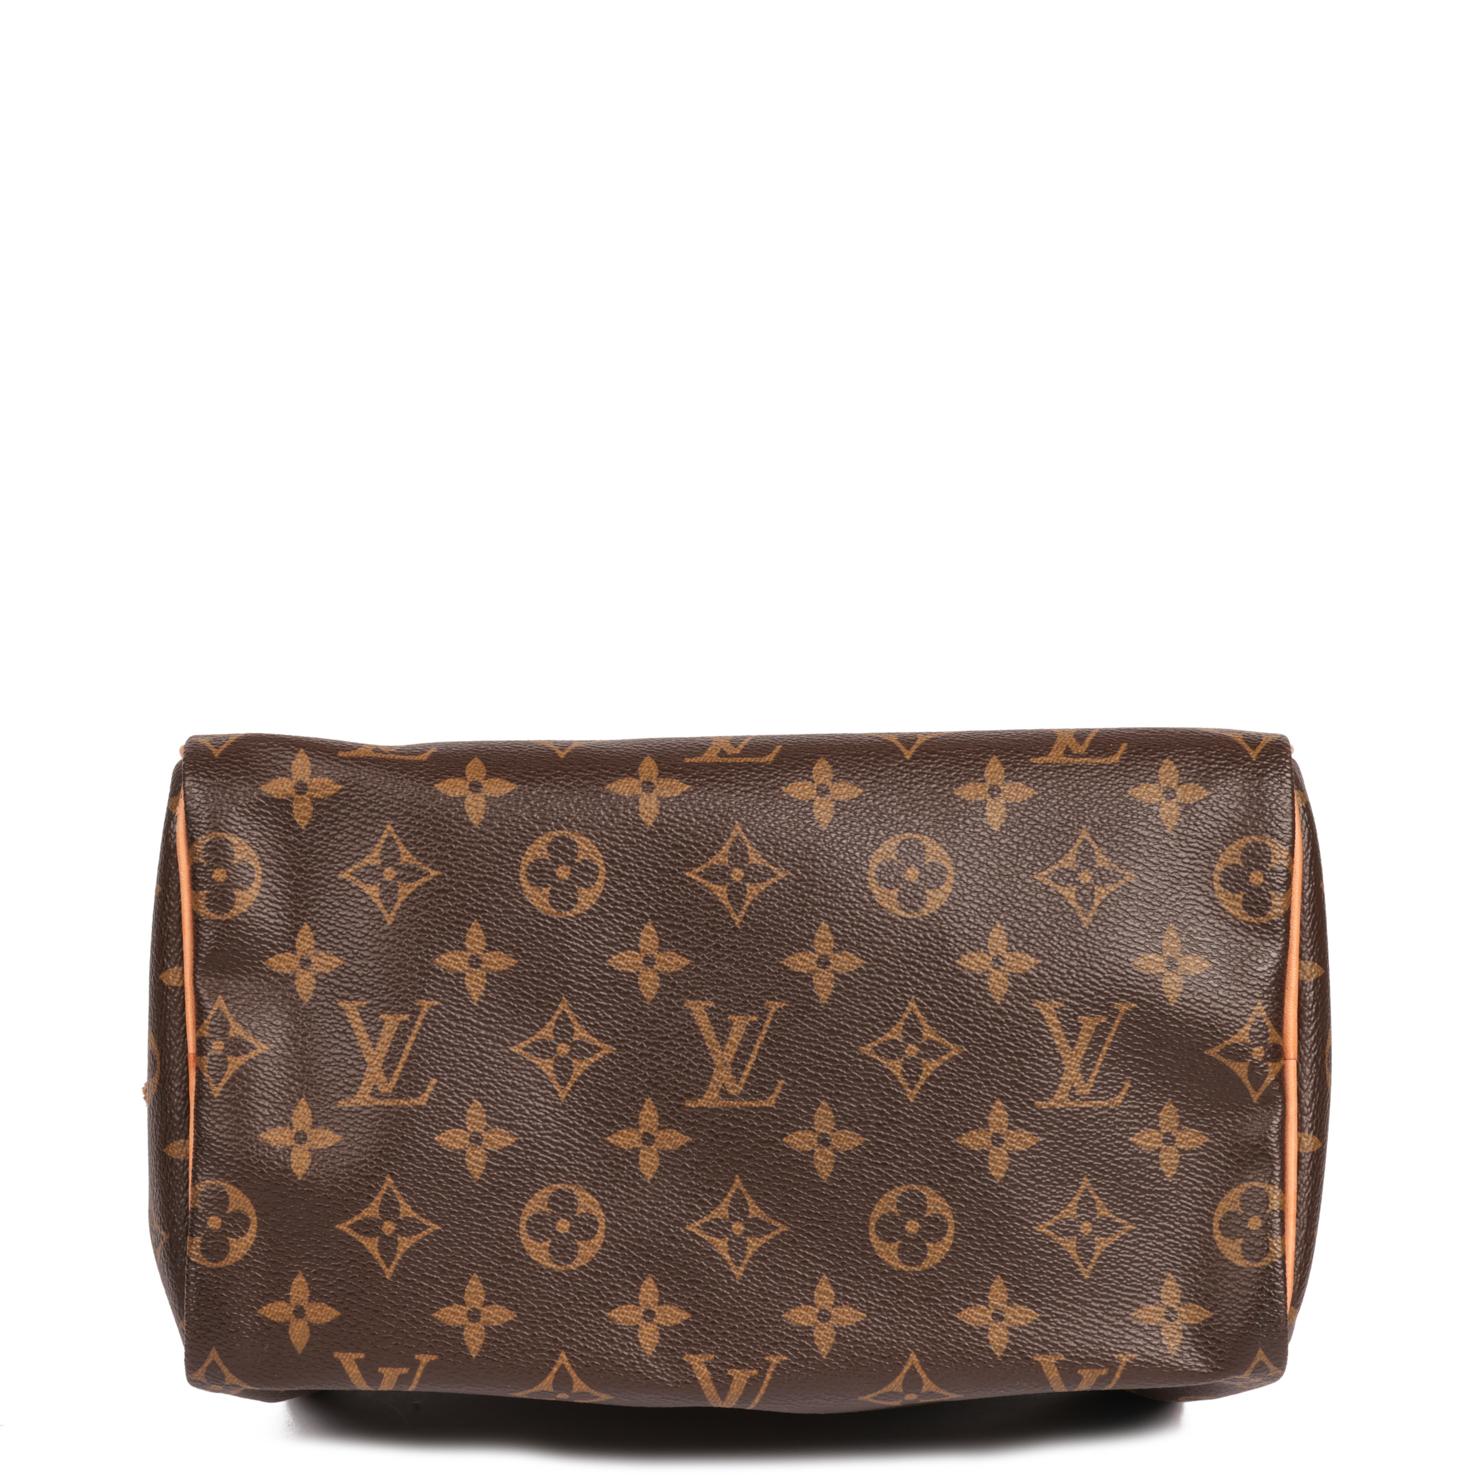 LOUIS VUITTON Brown Monogram Coated Canvas & Vacehtta Leather Speedy 25 2